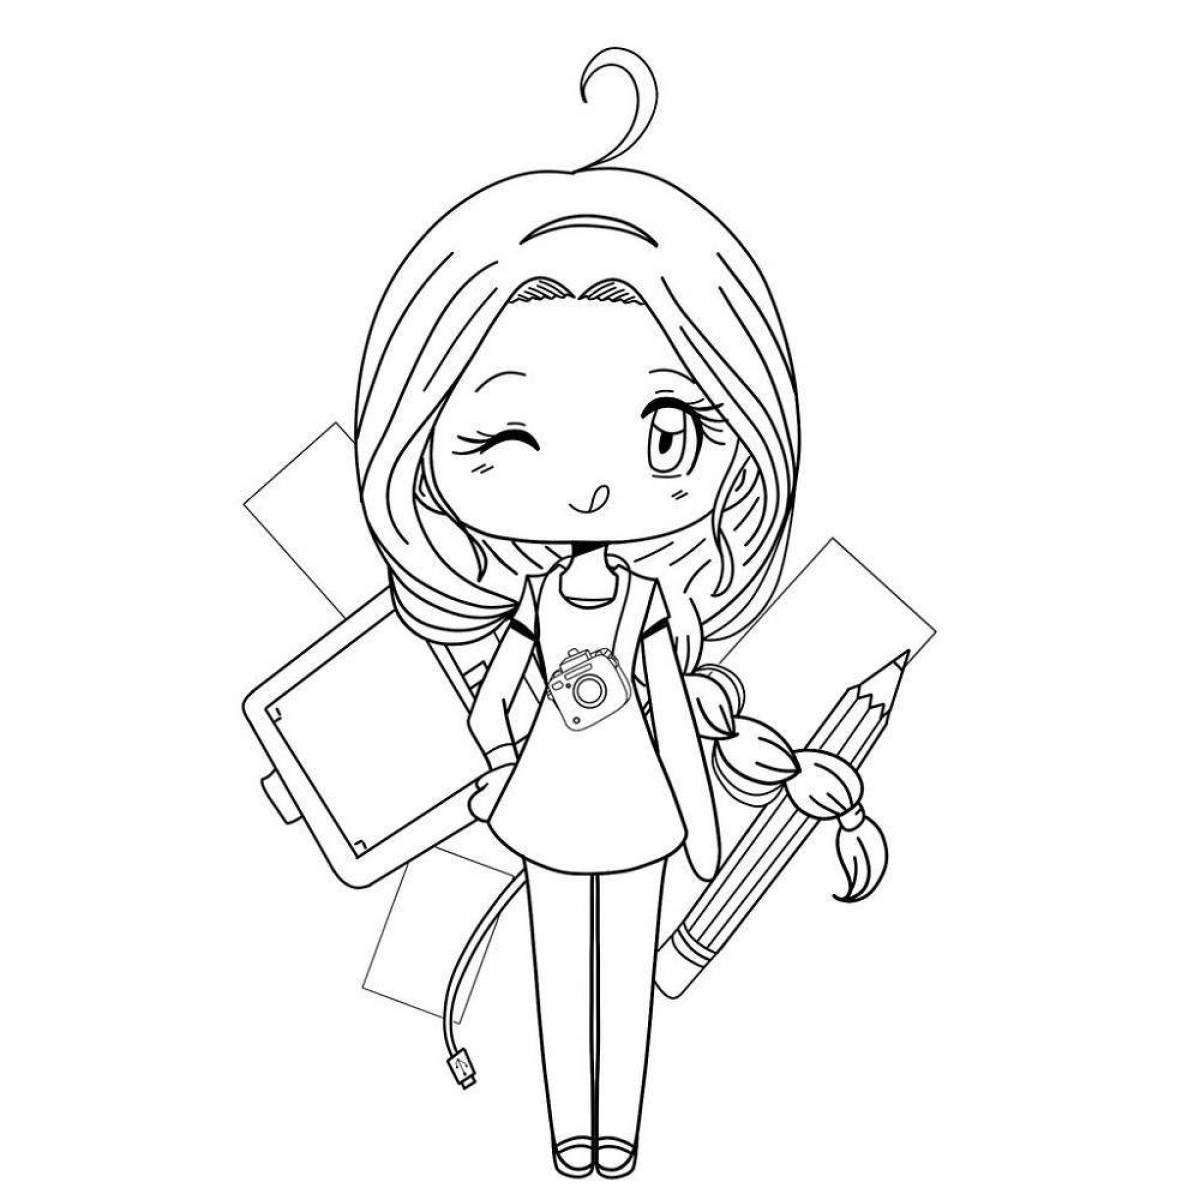 Gorgeous chibi dress up coloring page